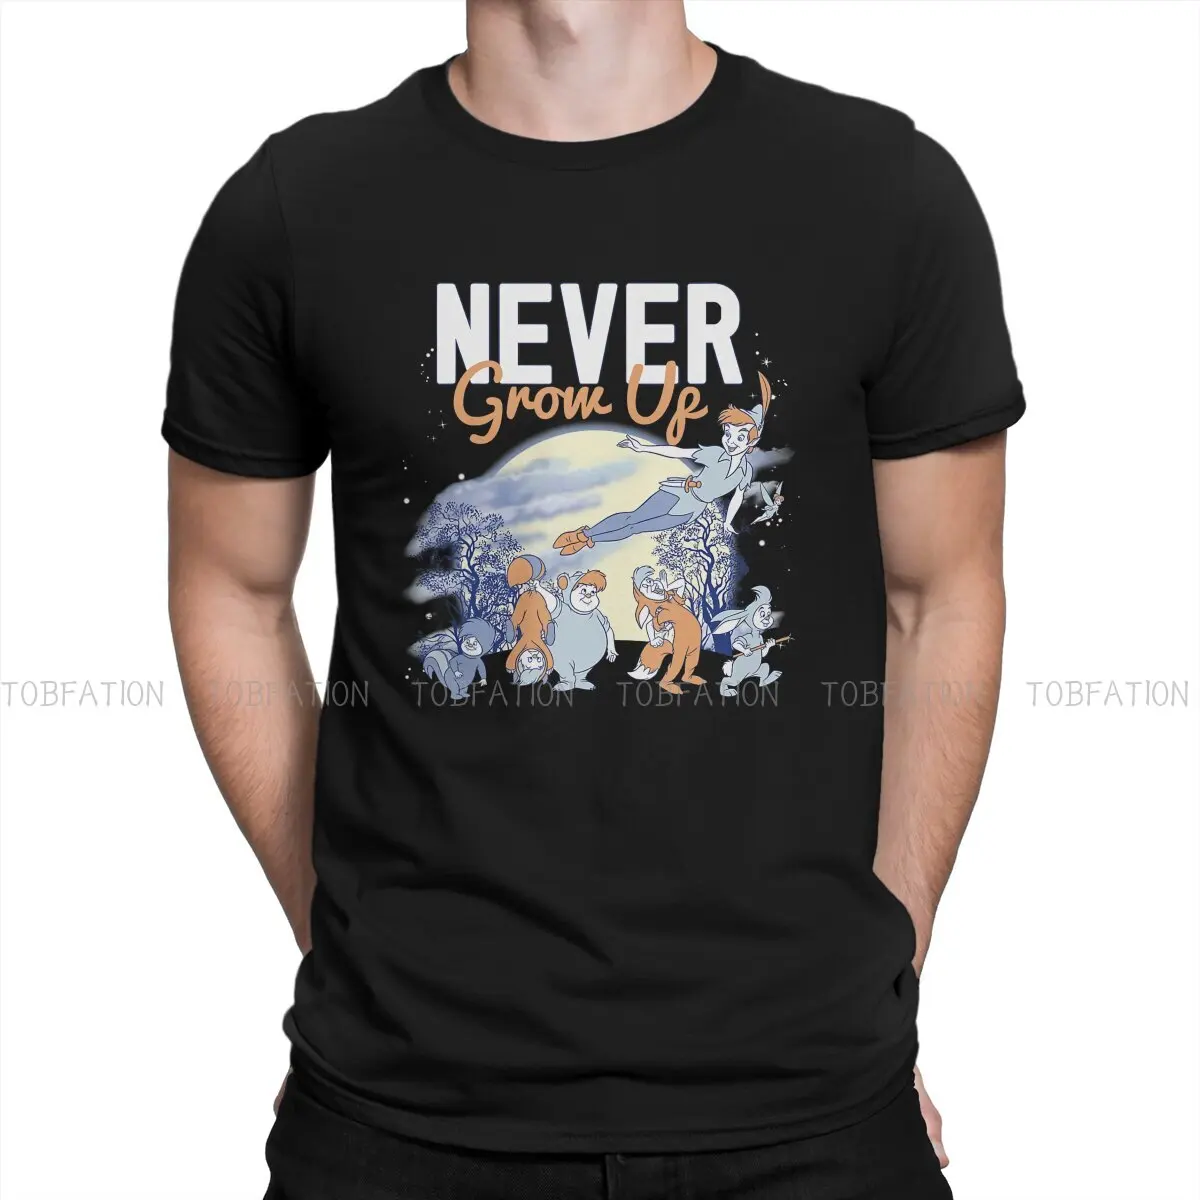 

Lost Boys Never Grow Up Night Portrait Classic TShirt For Male Disney Peter Pan Film Clothing Style T Shirt Soft Printed Loose